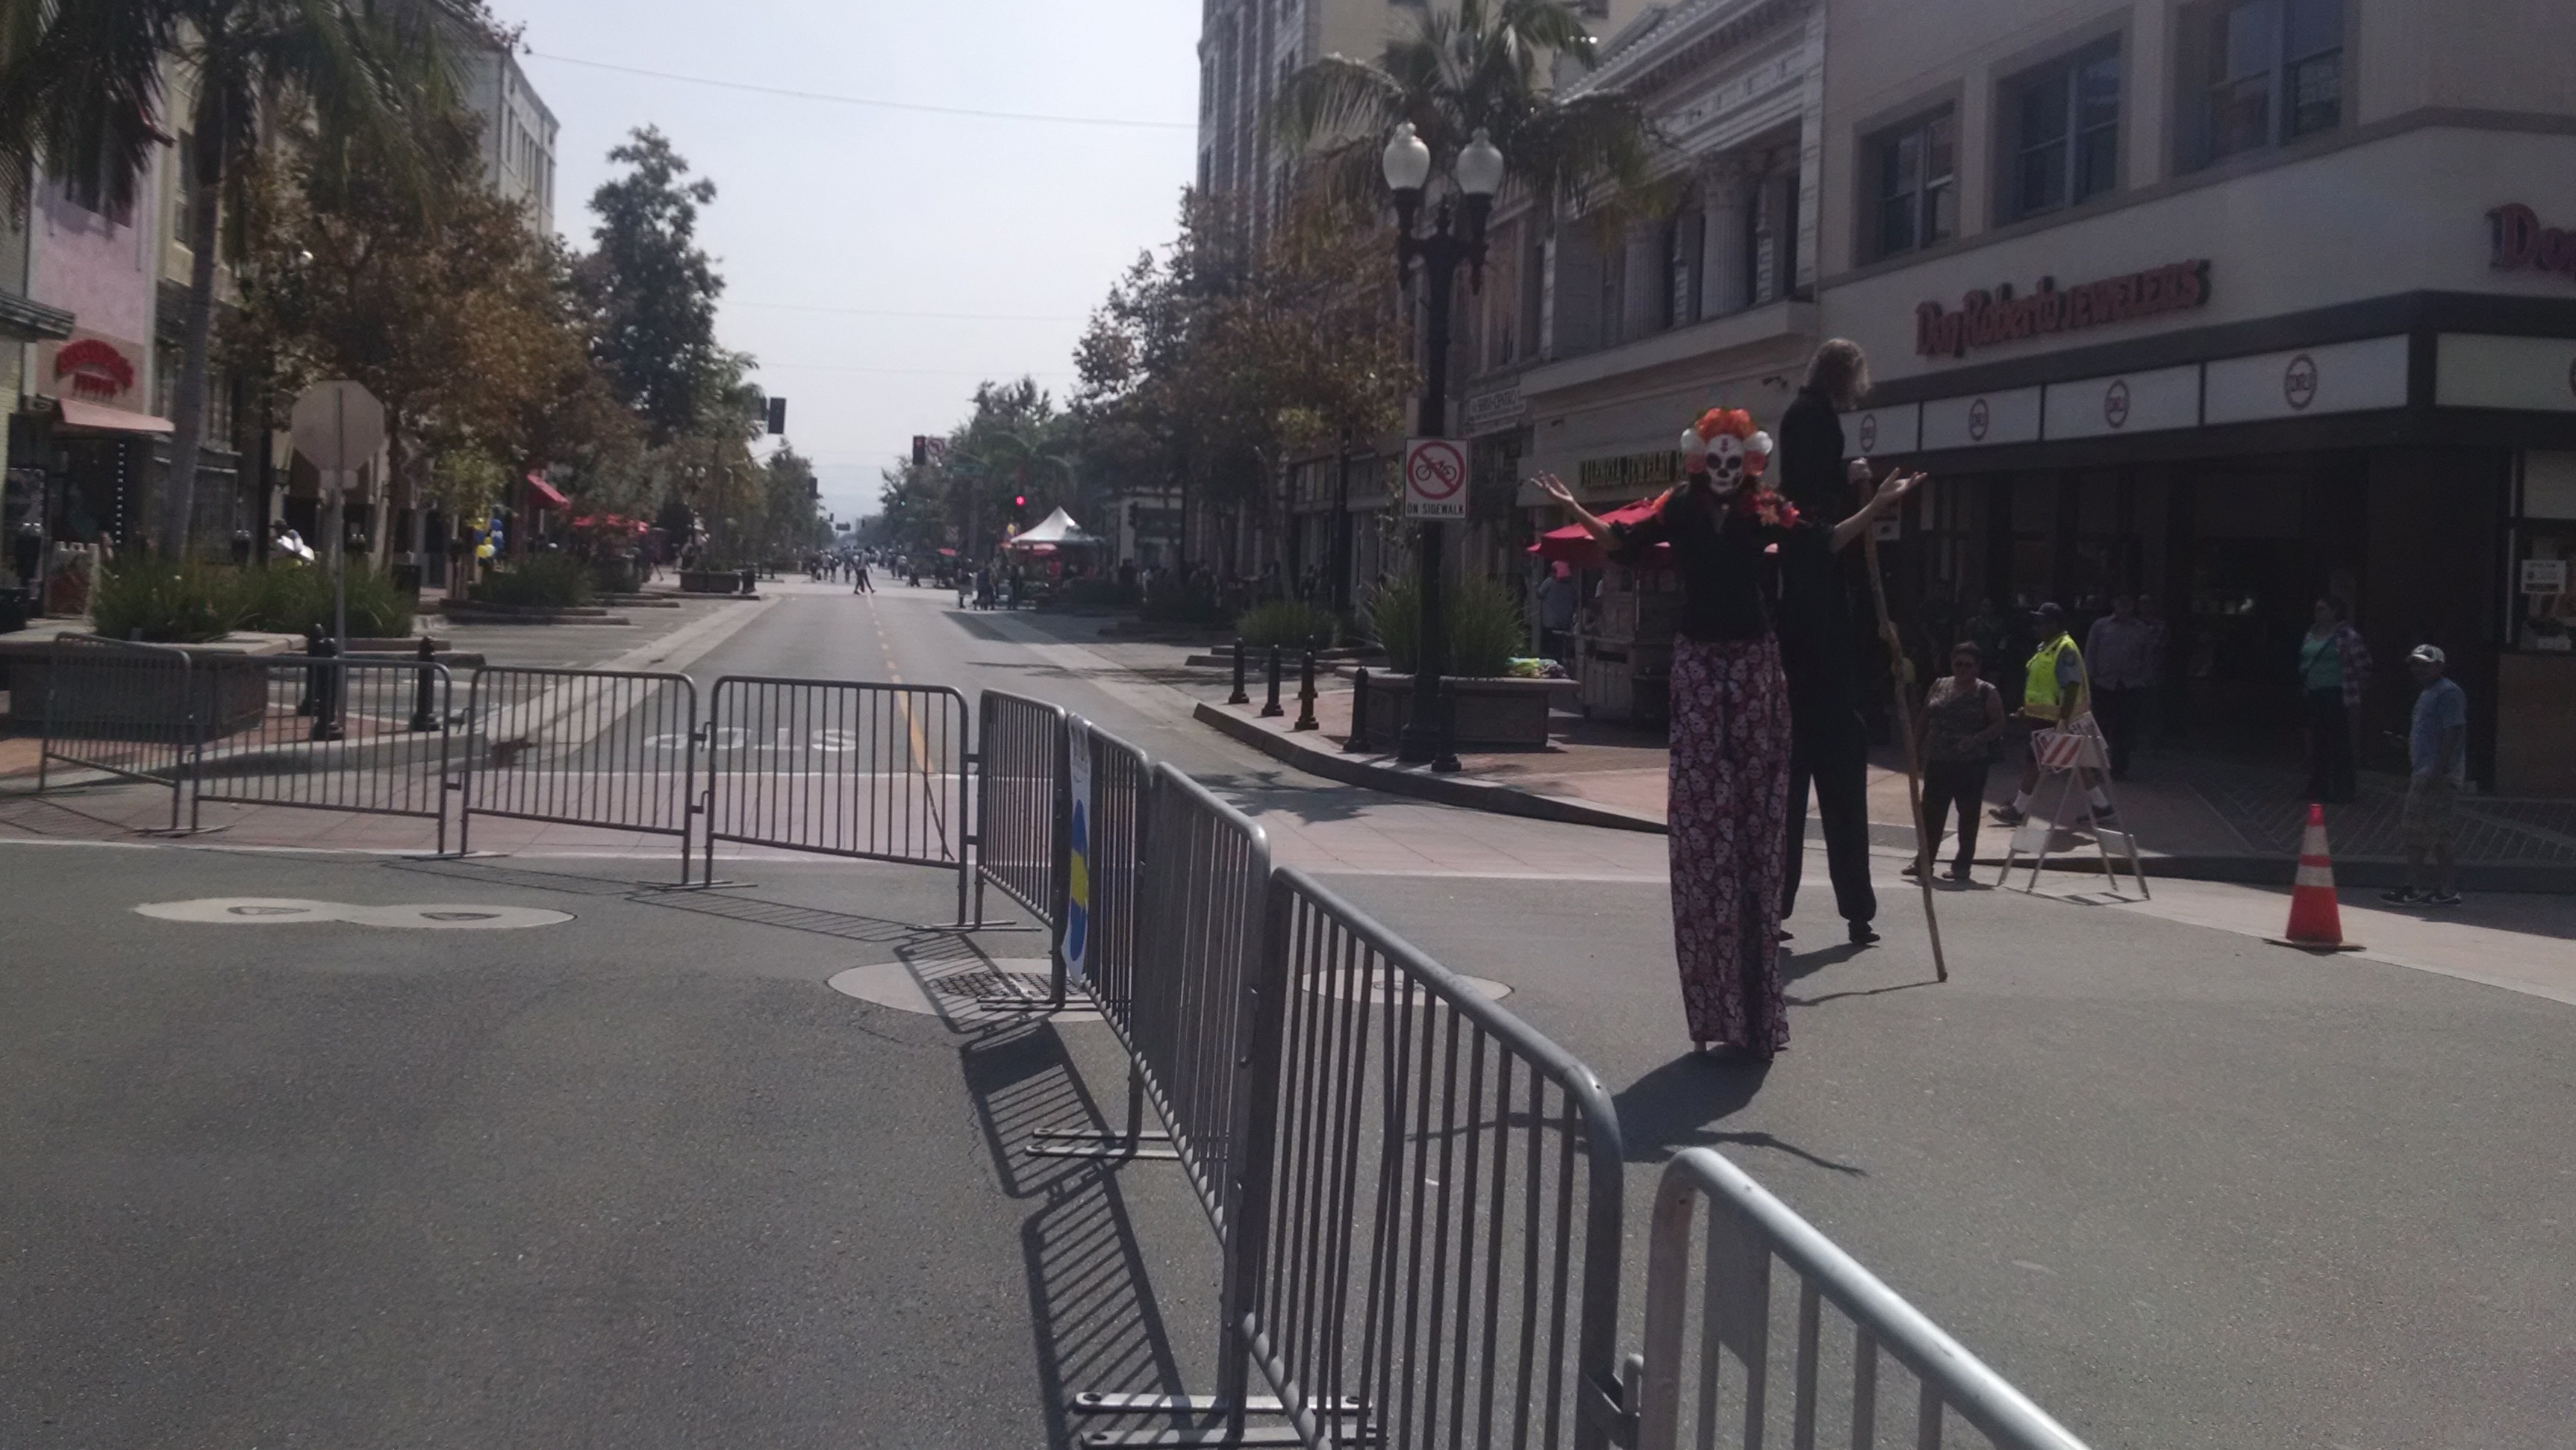 Stilt performers on Fourth Street. The barriers from the 5k that happened earlier in the day completely taken down until 11 a.m., an hour after the start of the open street event. Photo by Kristopher Fortin.